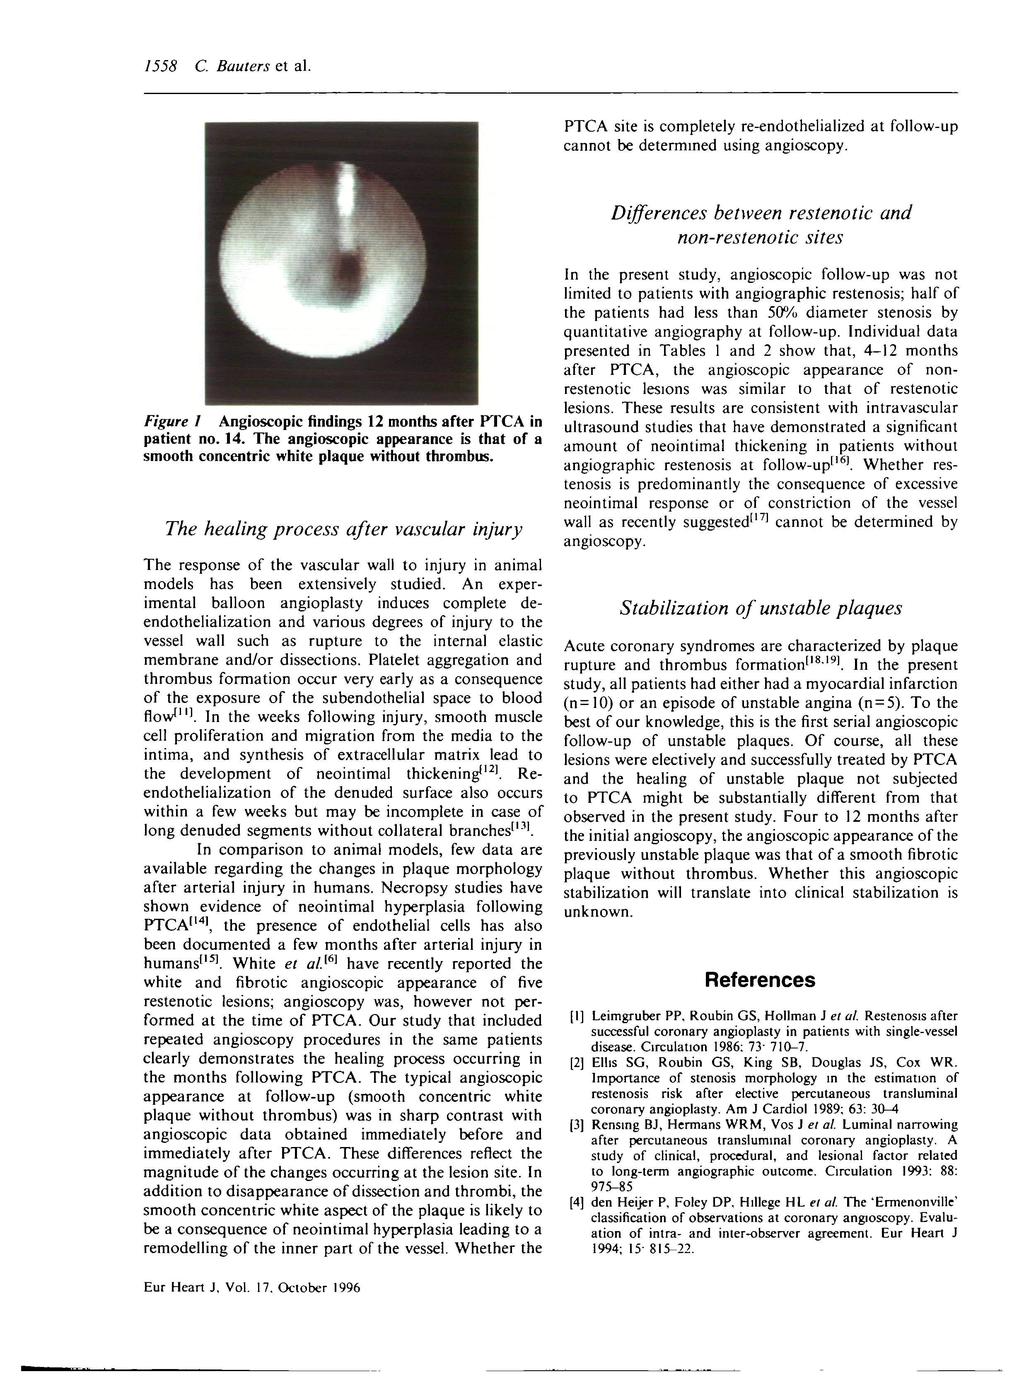 1558 C. Bauters et al. PTCA site is completely re-endothelialized at follow-up cannot be determined using angioscopy.